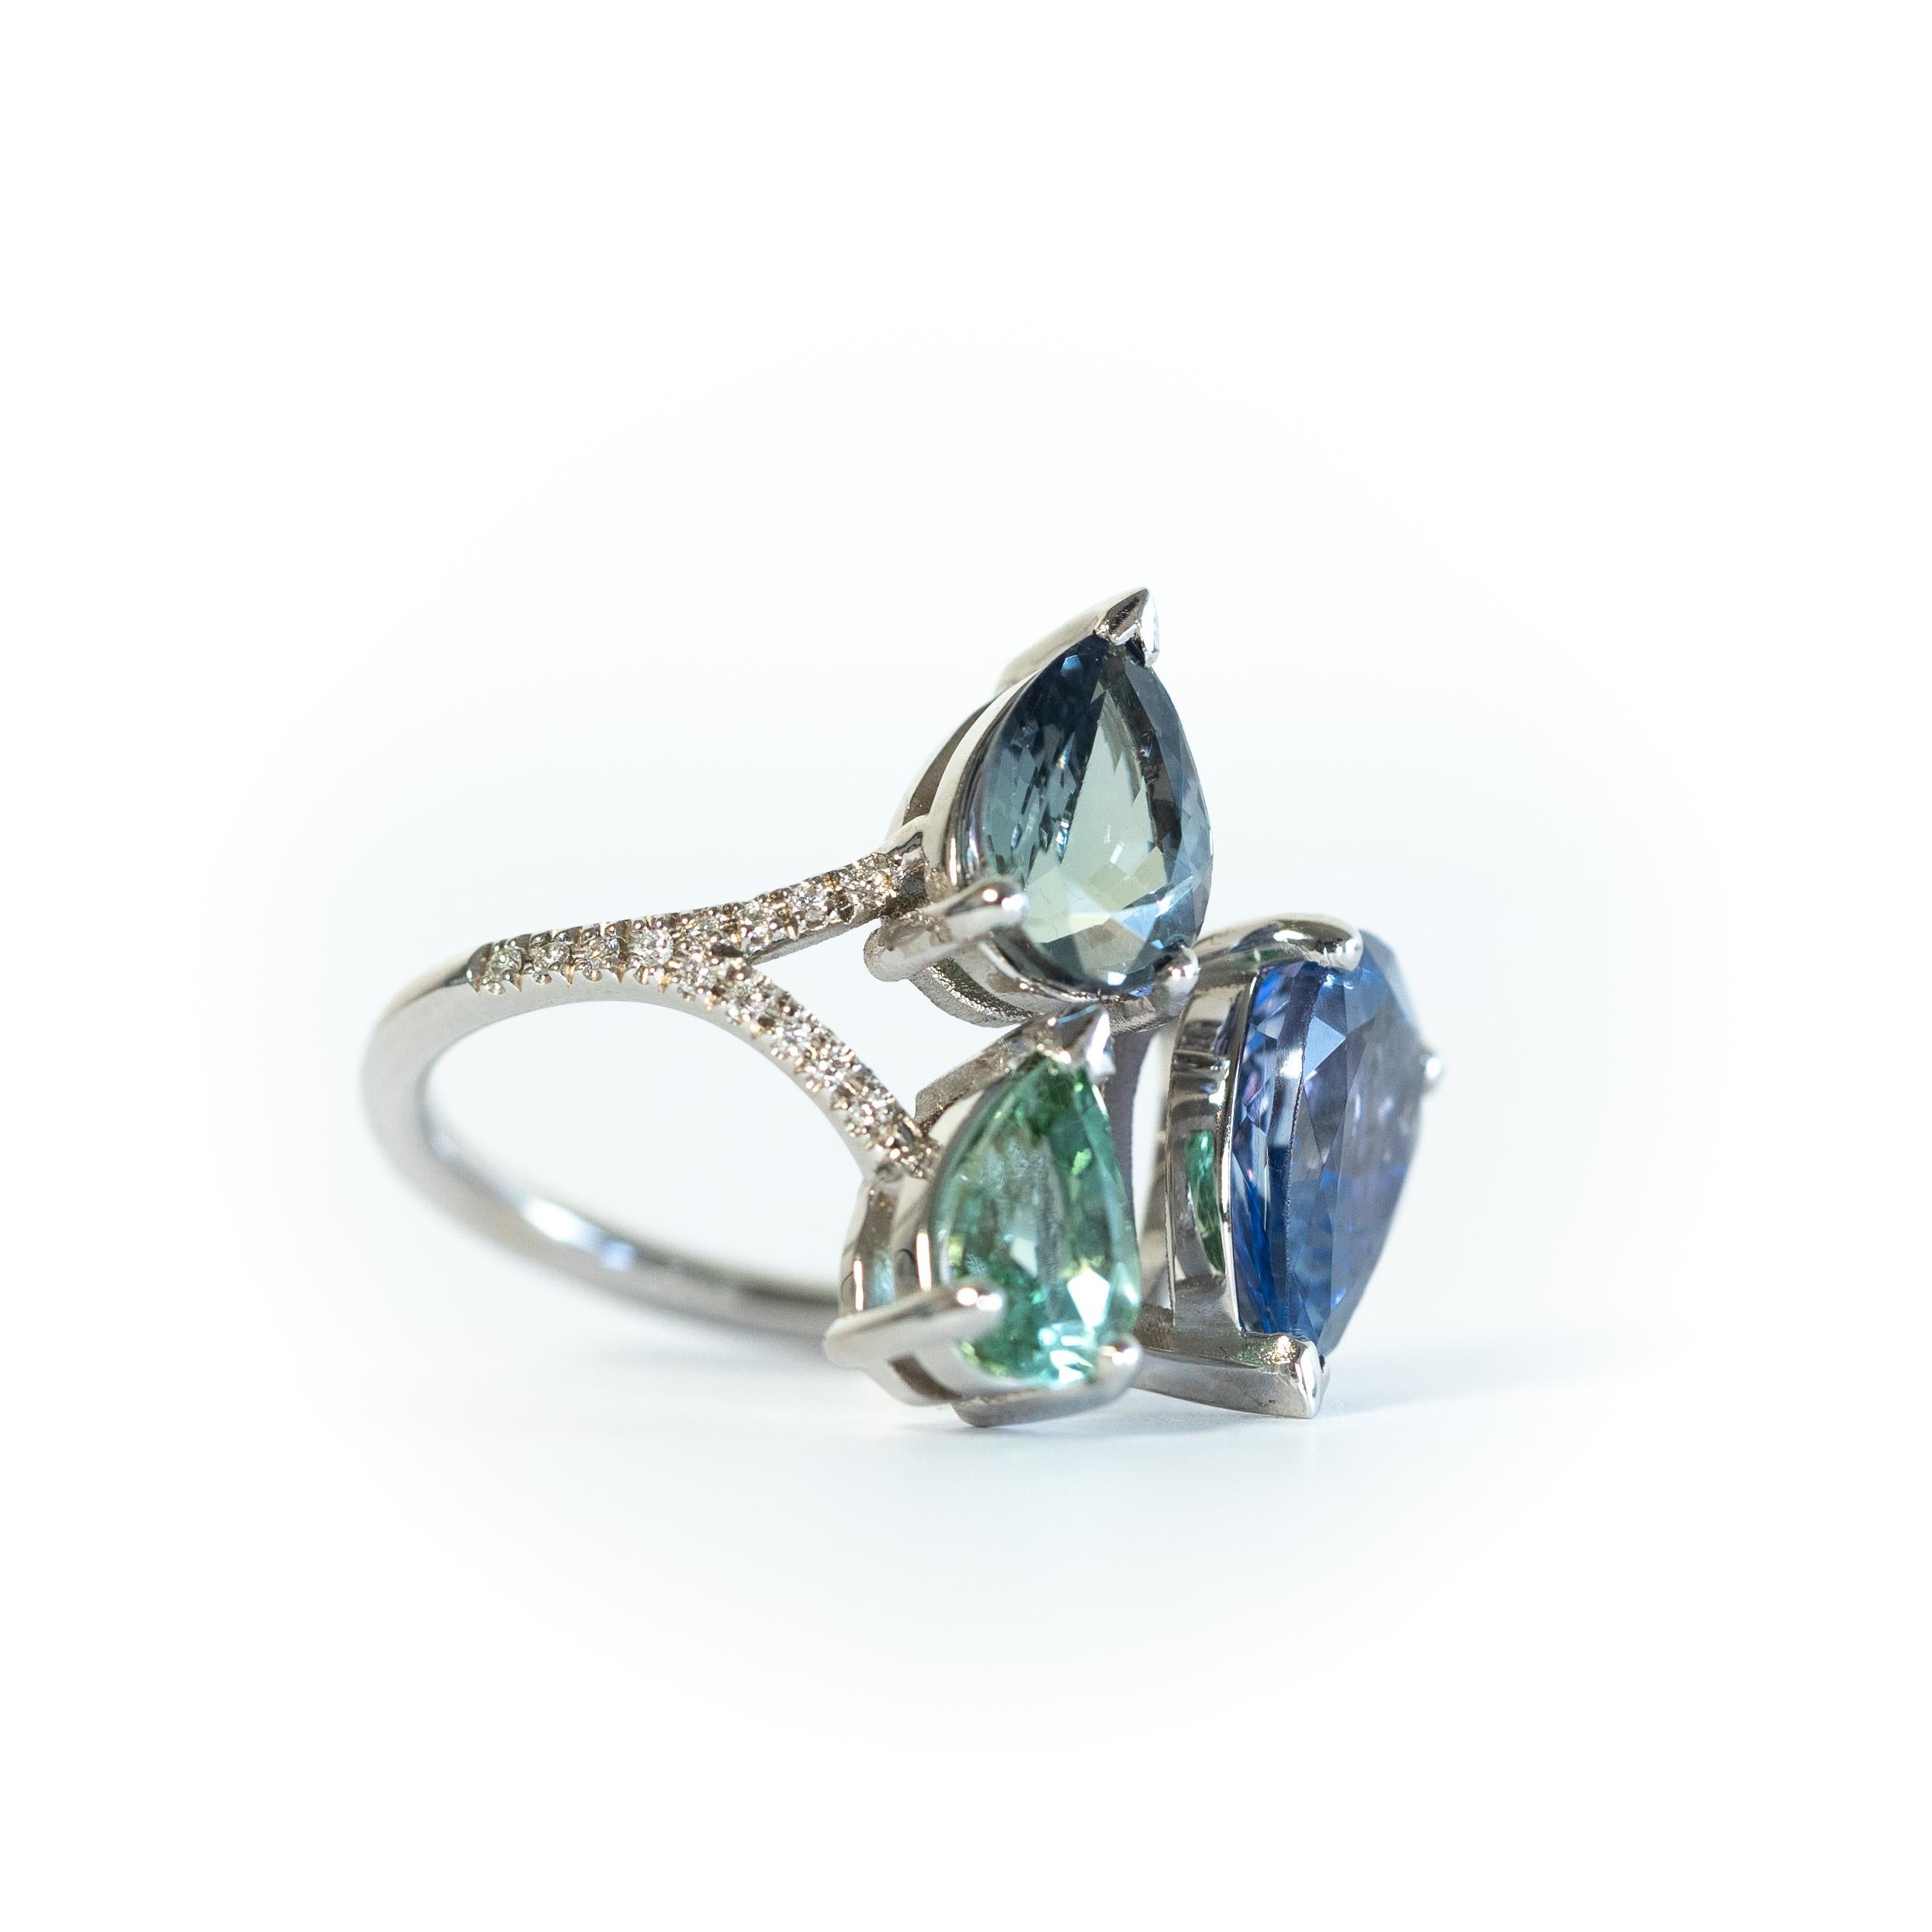 Made of 18K white gold, this charming and delicate trio ring is set with two tanzanites pearshape, one tourmalines pearshape and diamonds (0.06ct) on the mount.
Ring total weight : 5,93 g
Tanzanites weight : 3,35 carats
Green tourmaline weight :